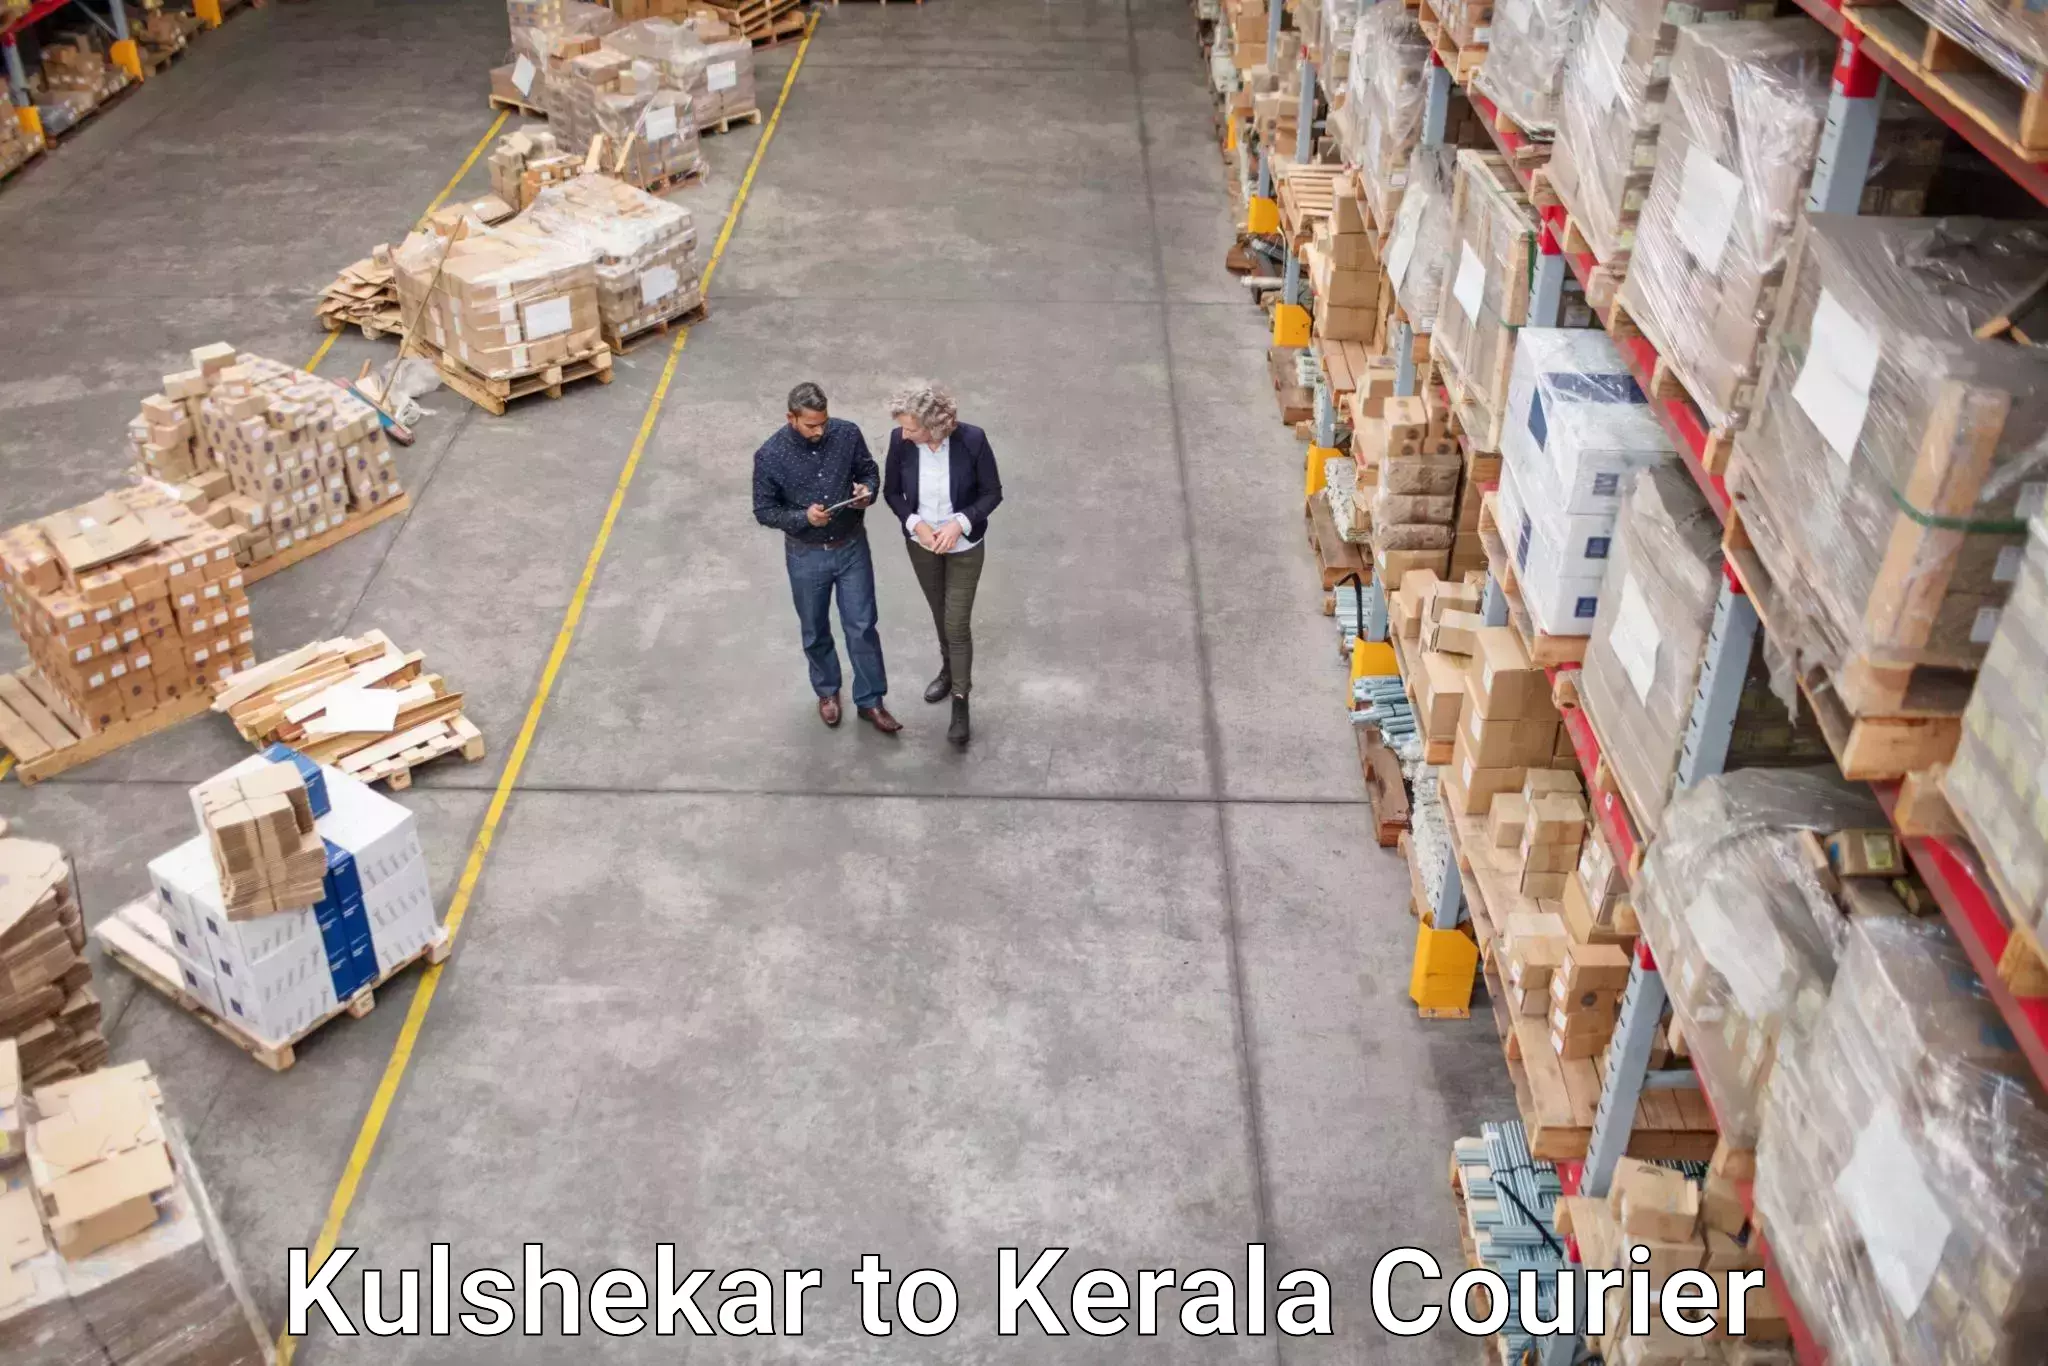 Overnight delivery services Kulshekar to Cochin